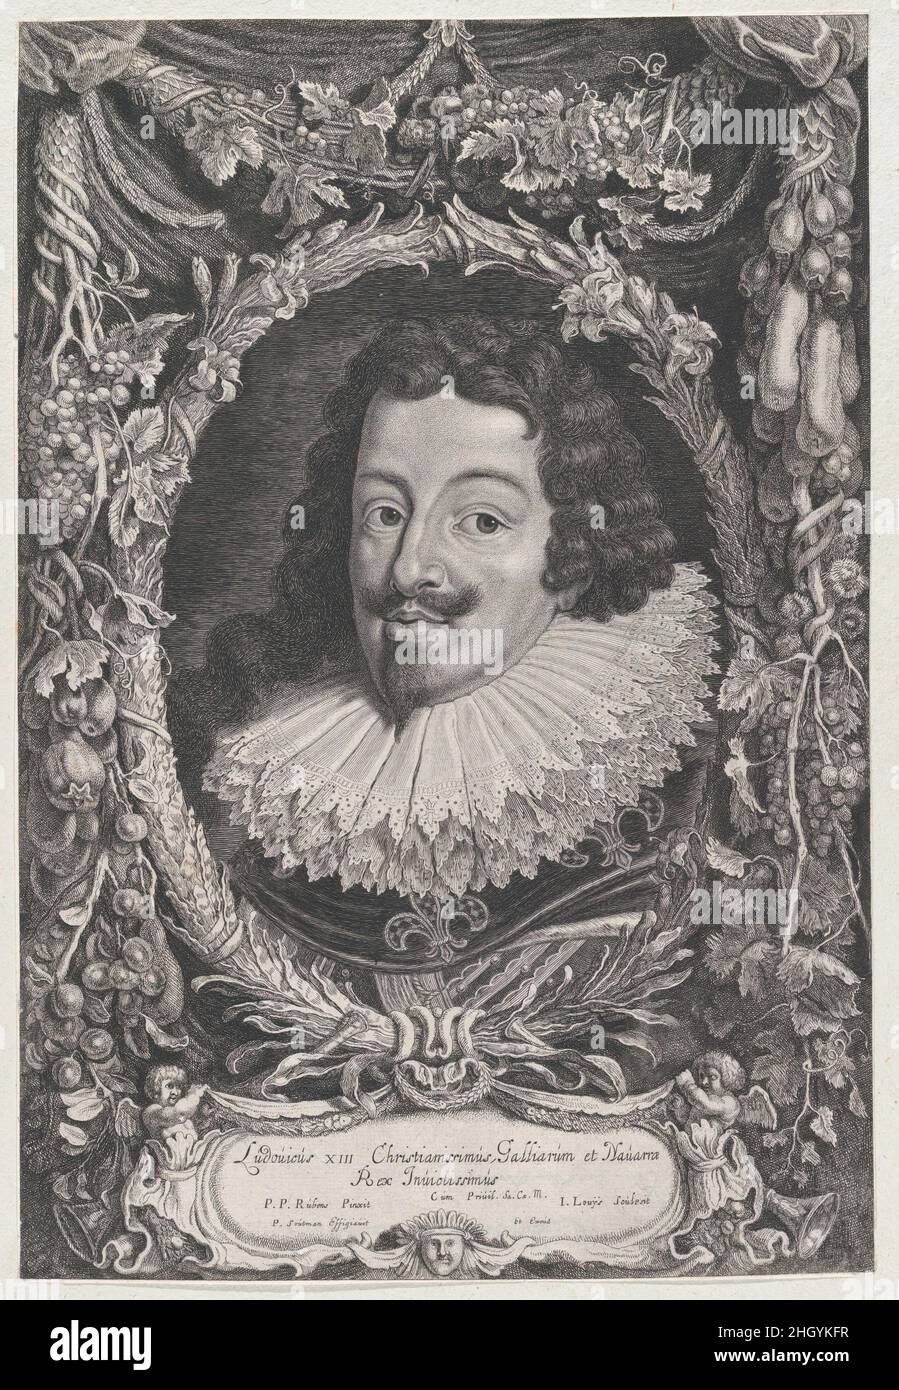 Portrait of Louis XIII, King of France ca. 1650 Jacob Louys Dutch. Portrait of Louis XIII, King of France. Jacob Louys (Dutch, 1595 or 1600–1673). ca. 1650. Engraving and etching. Pieter Soutman (Dutch, Haarlem, ca. 1580–1657 Haarlem). Louis XIII, King of France (French, Fontainebleau 1601–1643 Paris). Prints Stock Photo